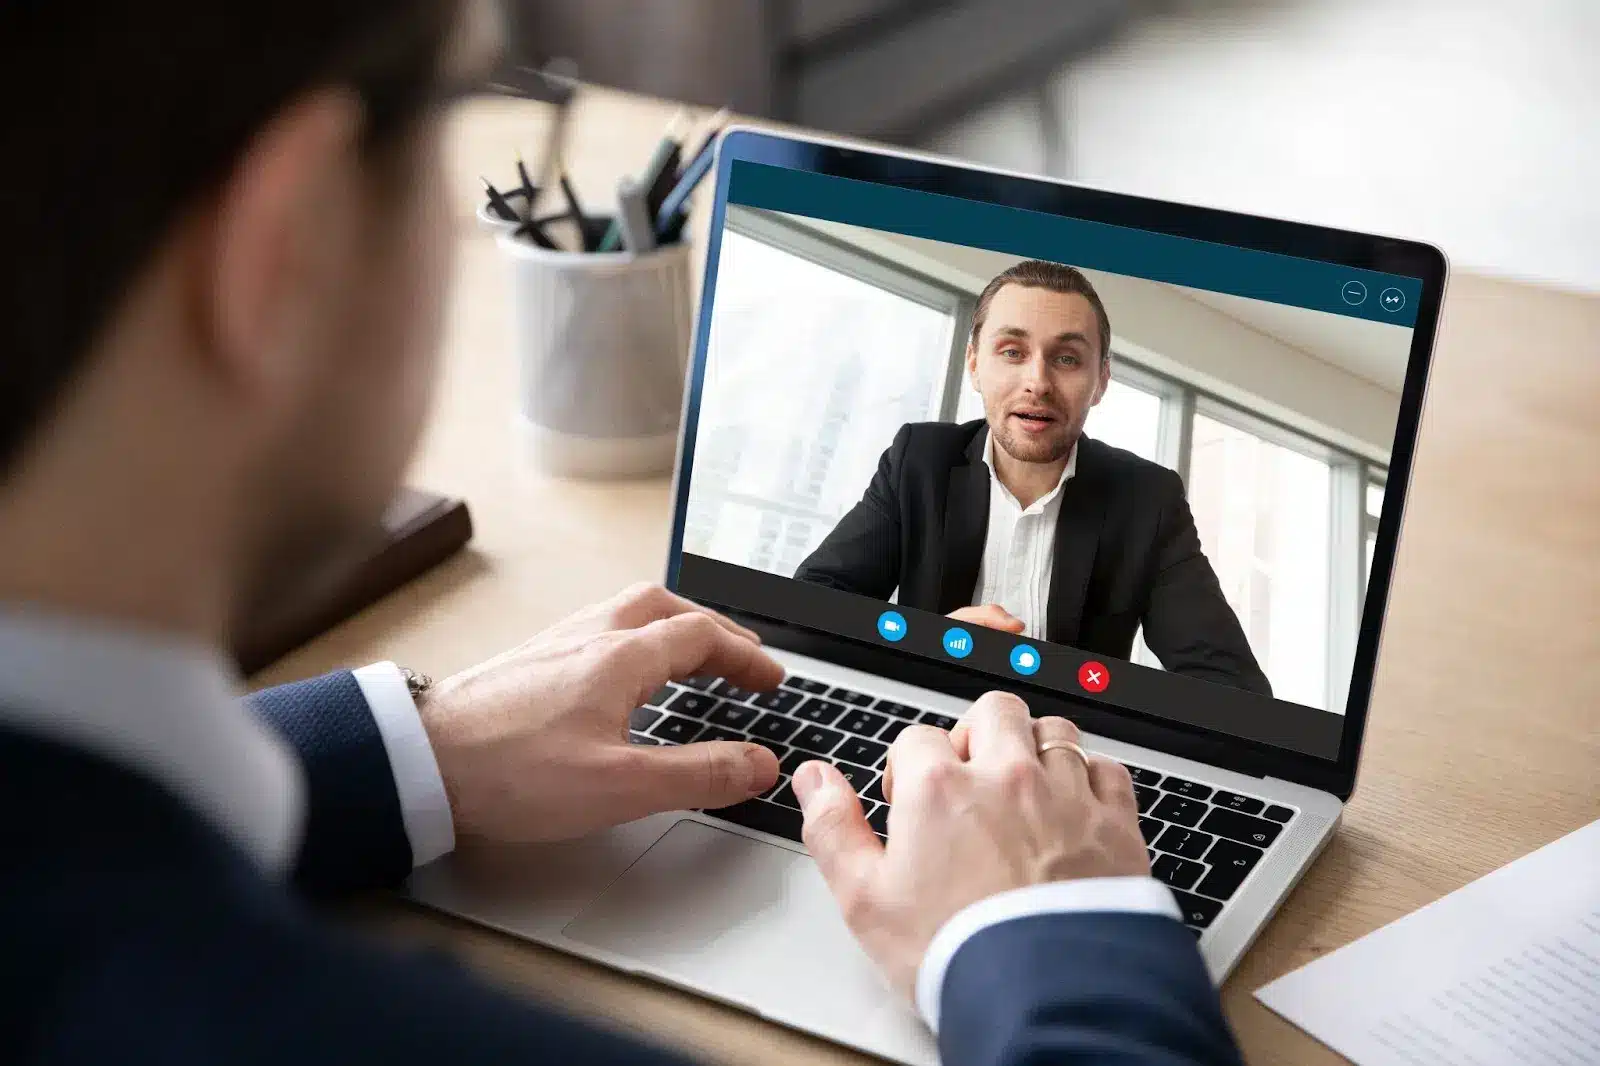 A man interacting on a videocall